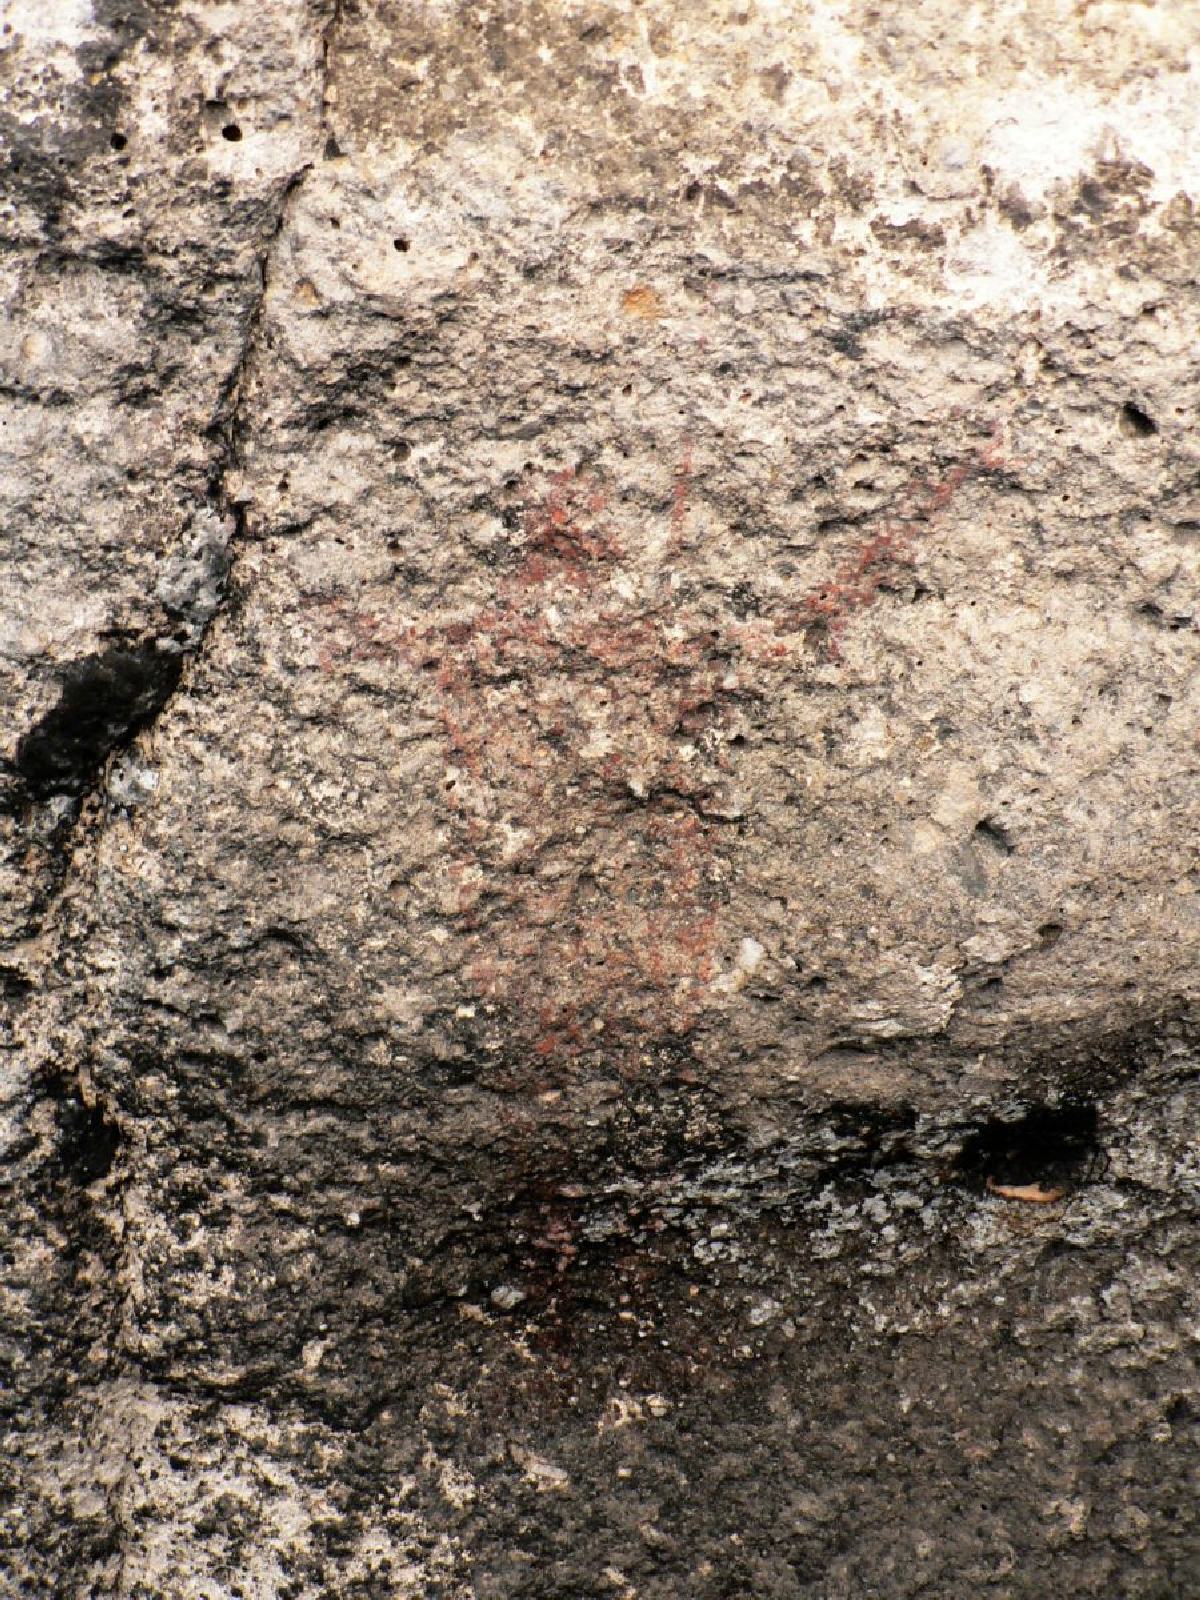 Near Soledad is another cave with faint smudges on its walls.